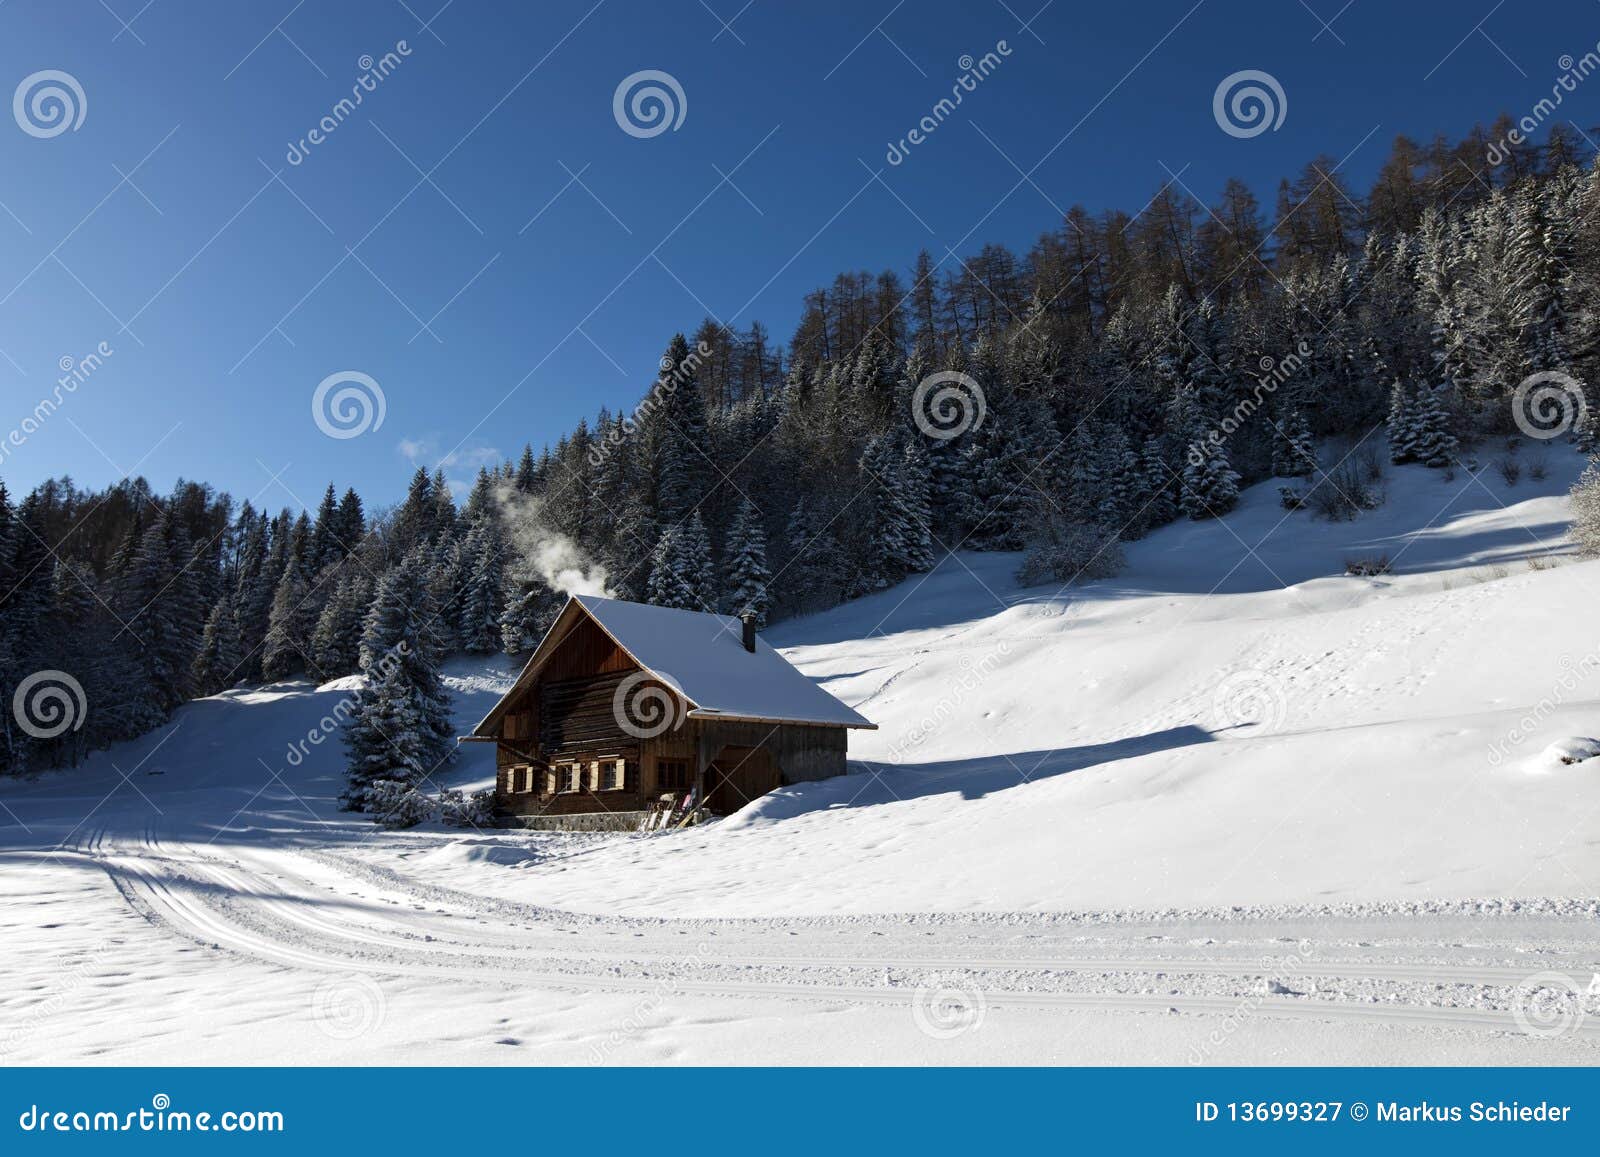 Royalty Free Stock Photography: Winter scenery with log cabin